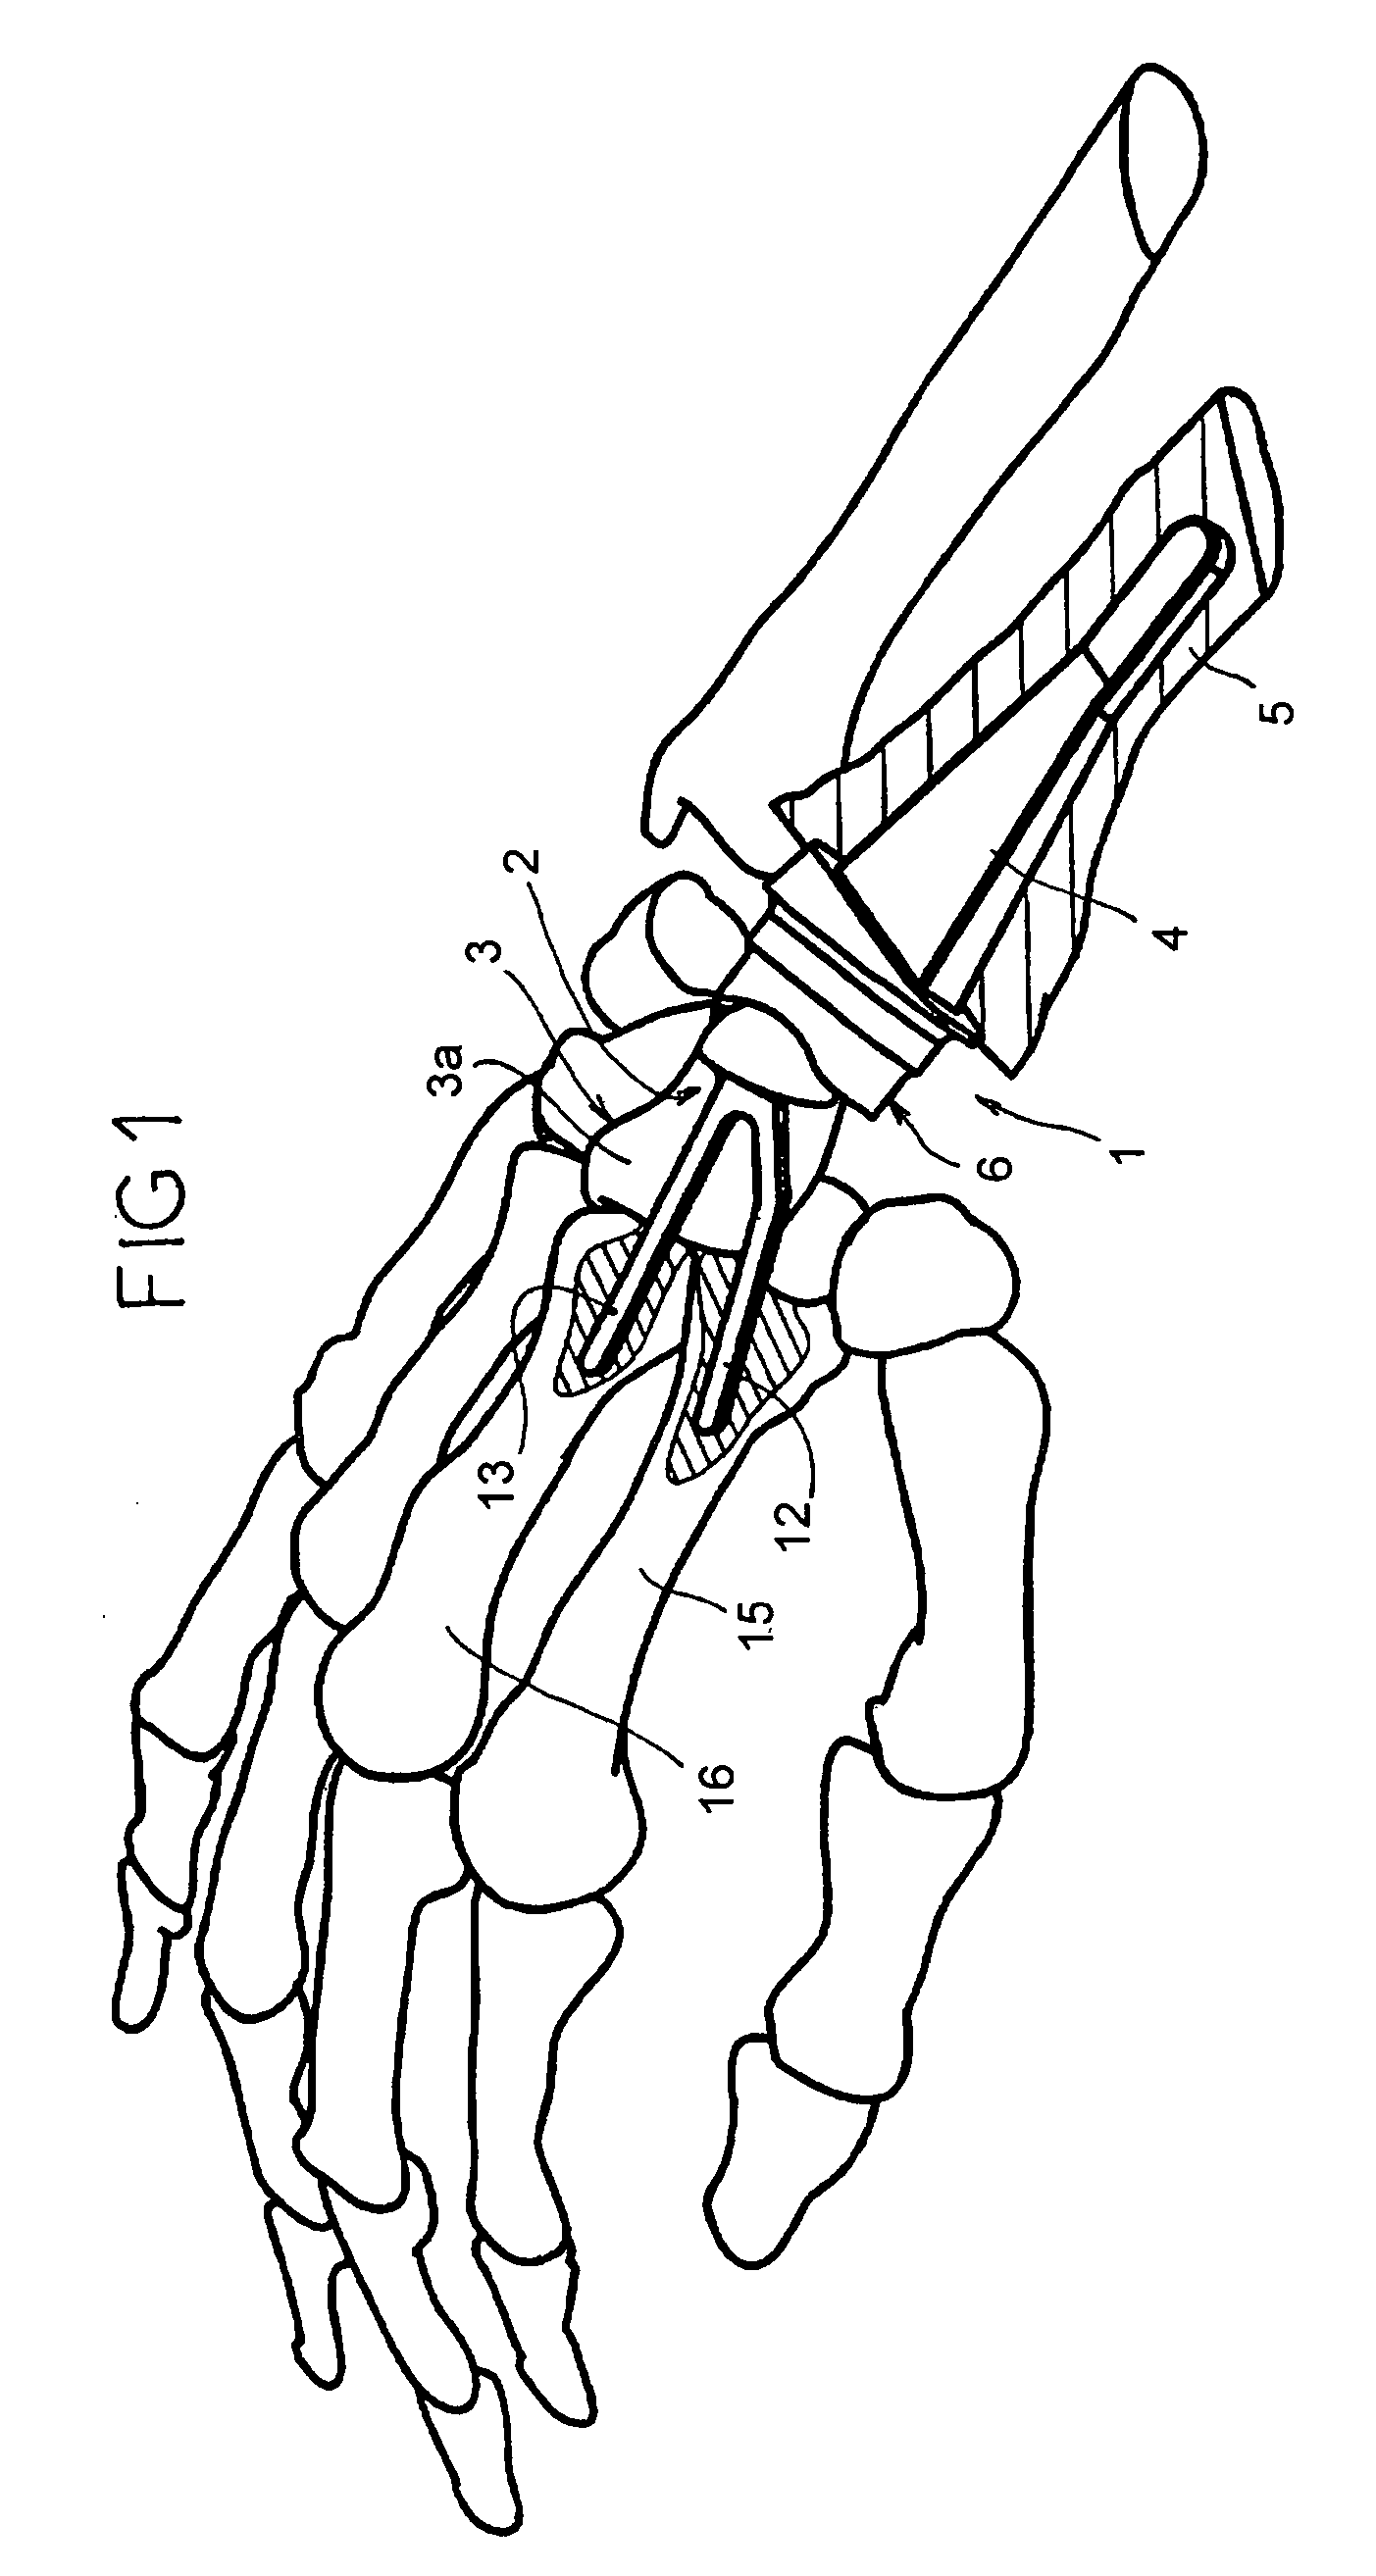 Wrist articulation prosthesis and set of elements allowing building of this prosthesis